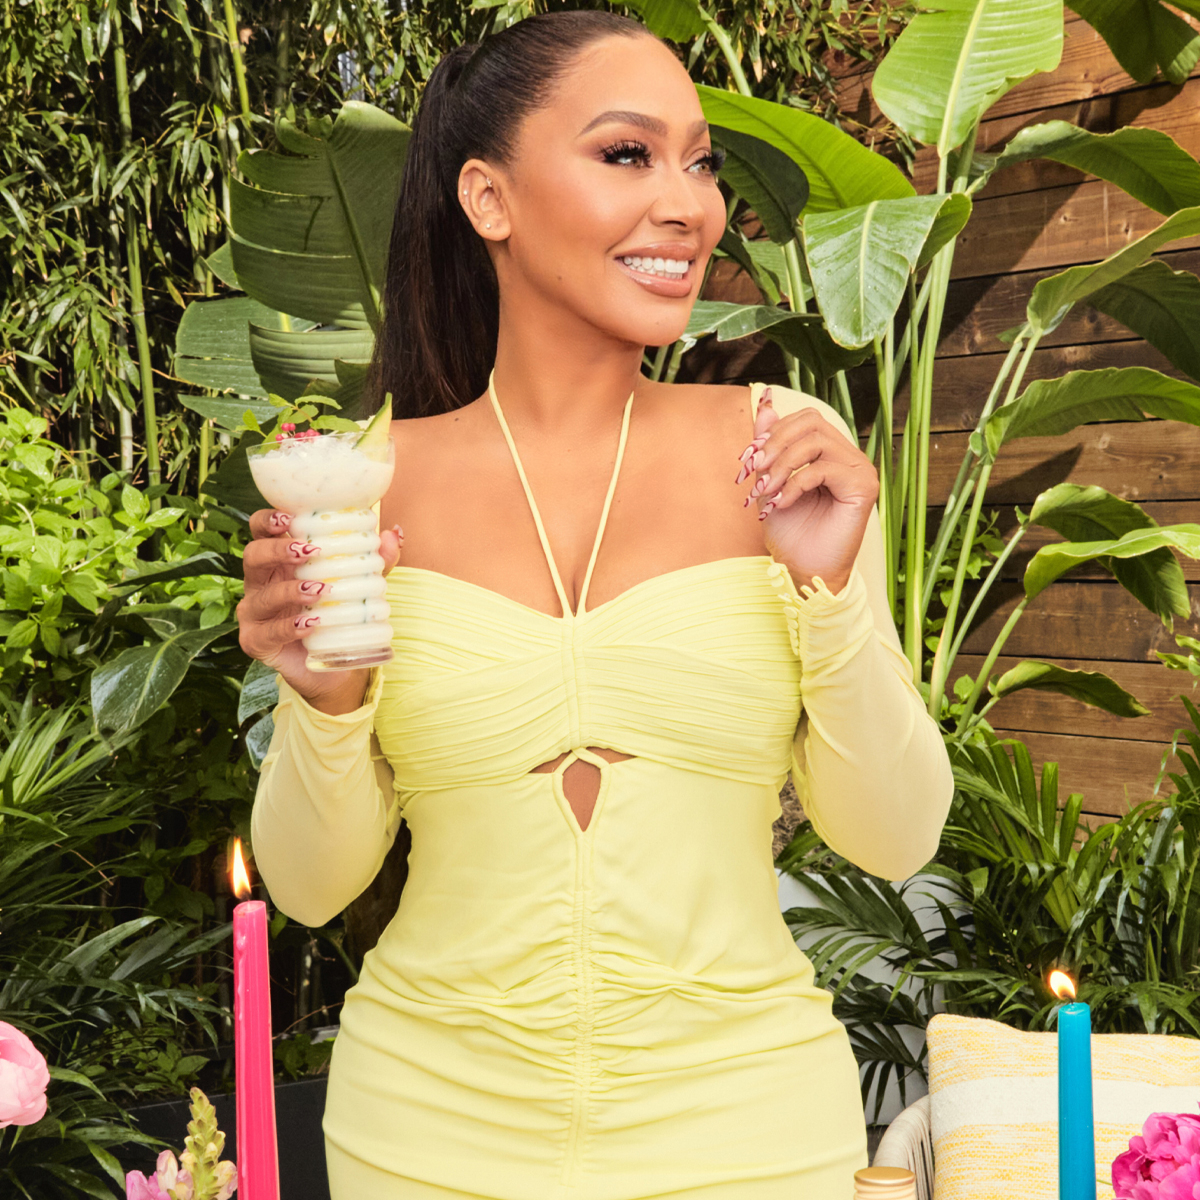 La La Anthony’s Go-To Cocktail is Inspired by Her Puerto Rican Roots